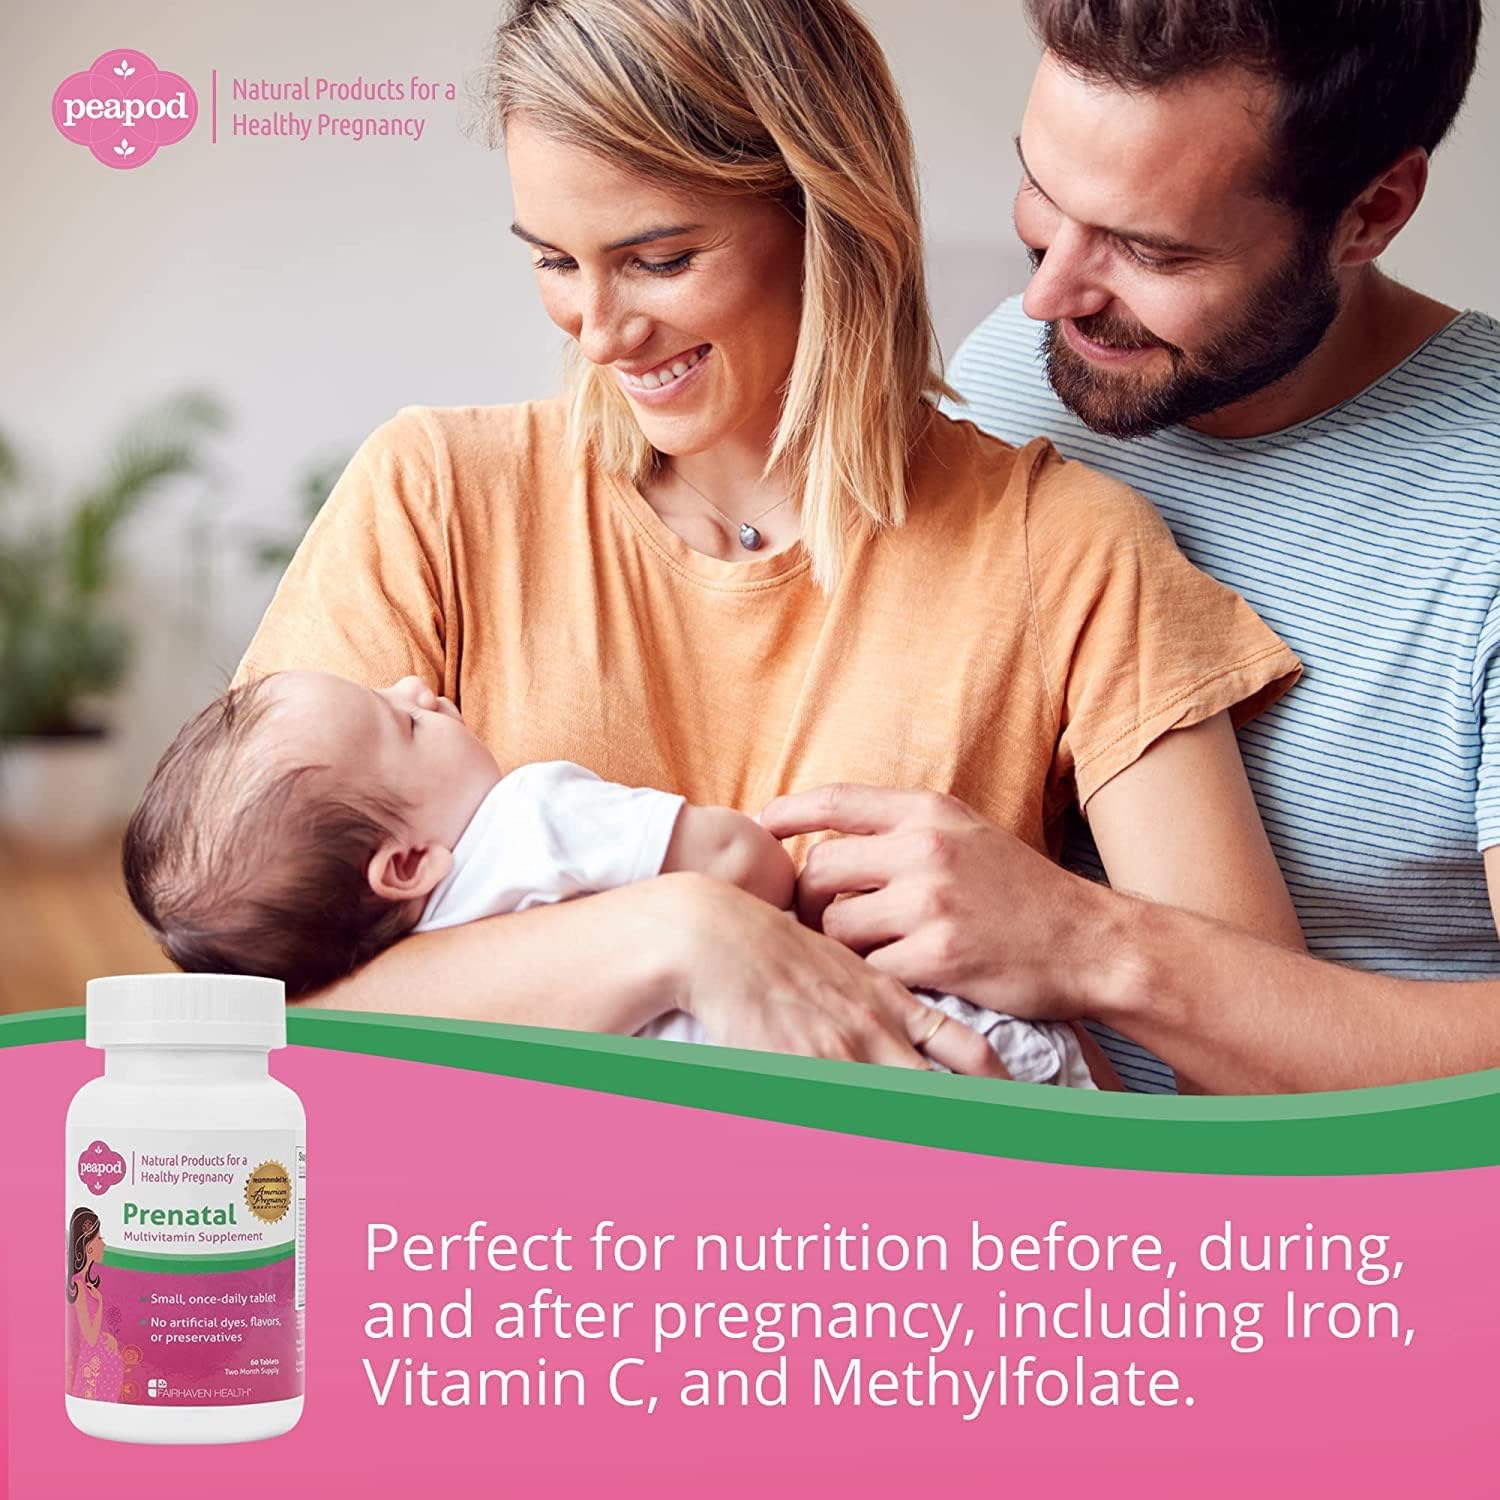 Peapod Prenatal Multivitamins, Essential for Women Trying to Conceive to Support Pregnancy  Baby Health, Includes Iron, Vitamin C and Folic Acid, Take Daily, Easy to Swallow Pill (2 Month Supply)